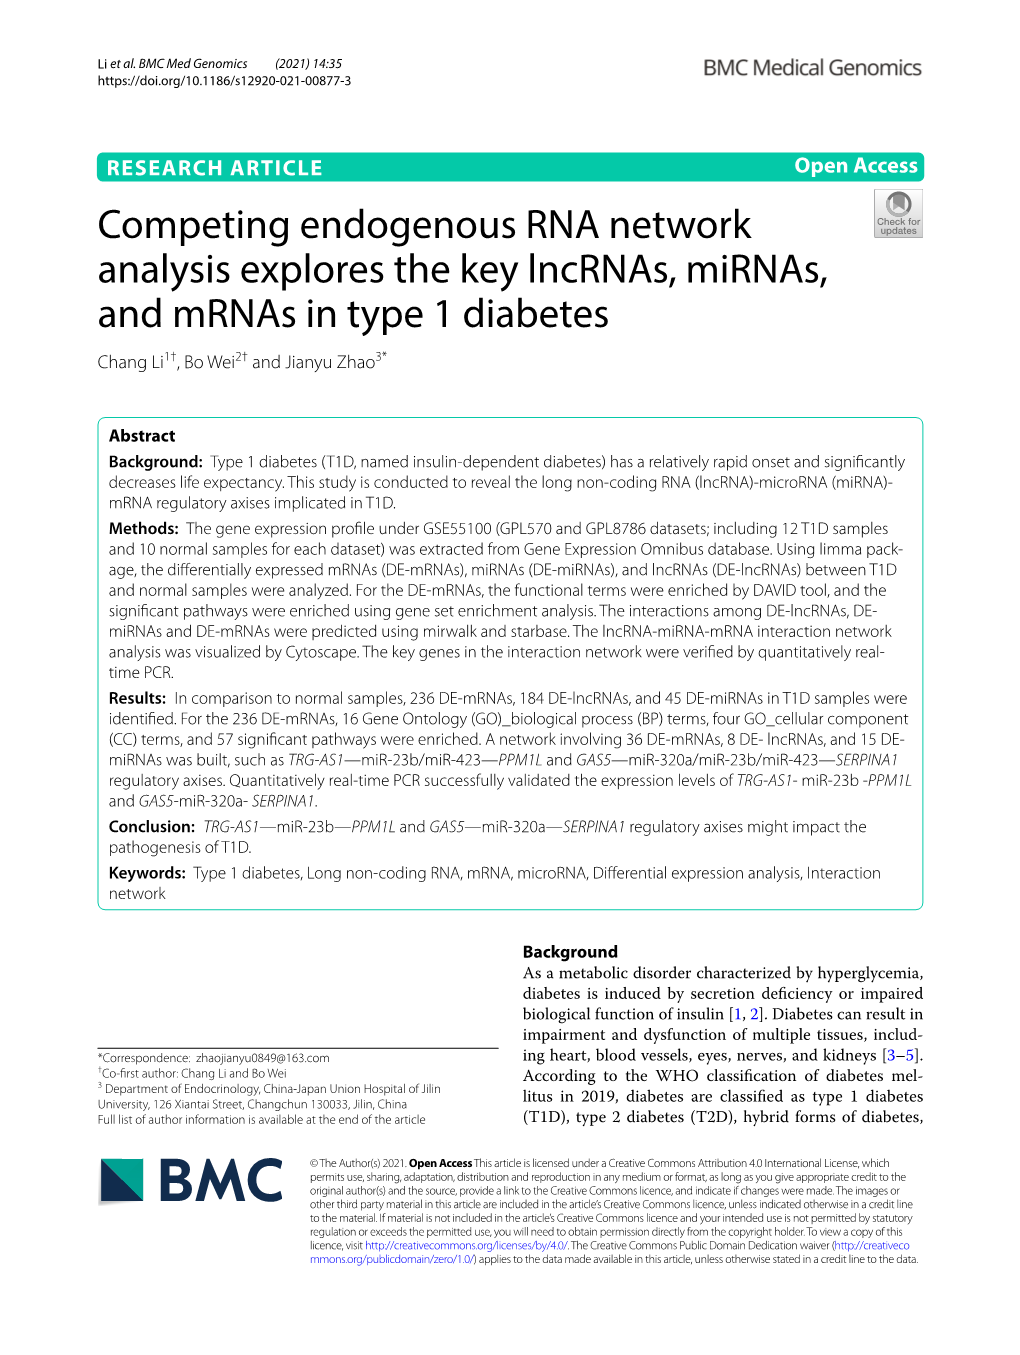 Competing Endogenous RNA Network Analysis Explores the Key Lncrnas, Mirnas, and Mrnas in Type 1 Diabetes Chang Li1†, Bo Wei2† and Jianyu Zhao3*